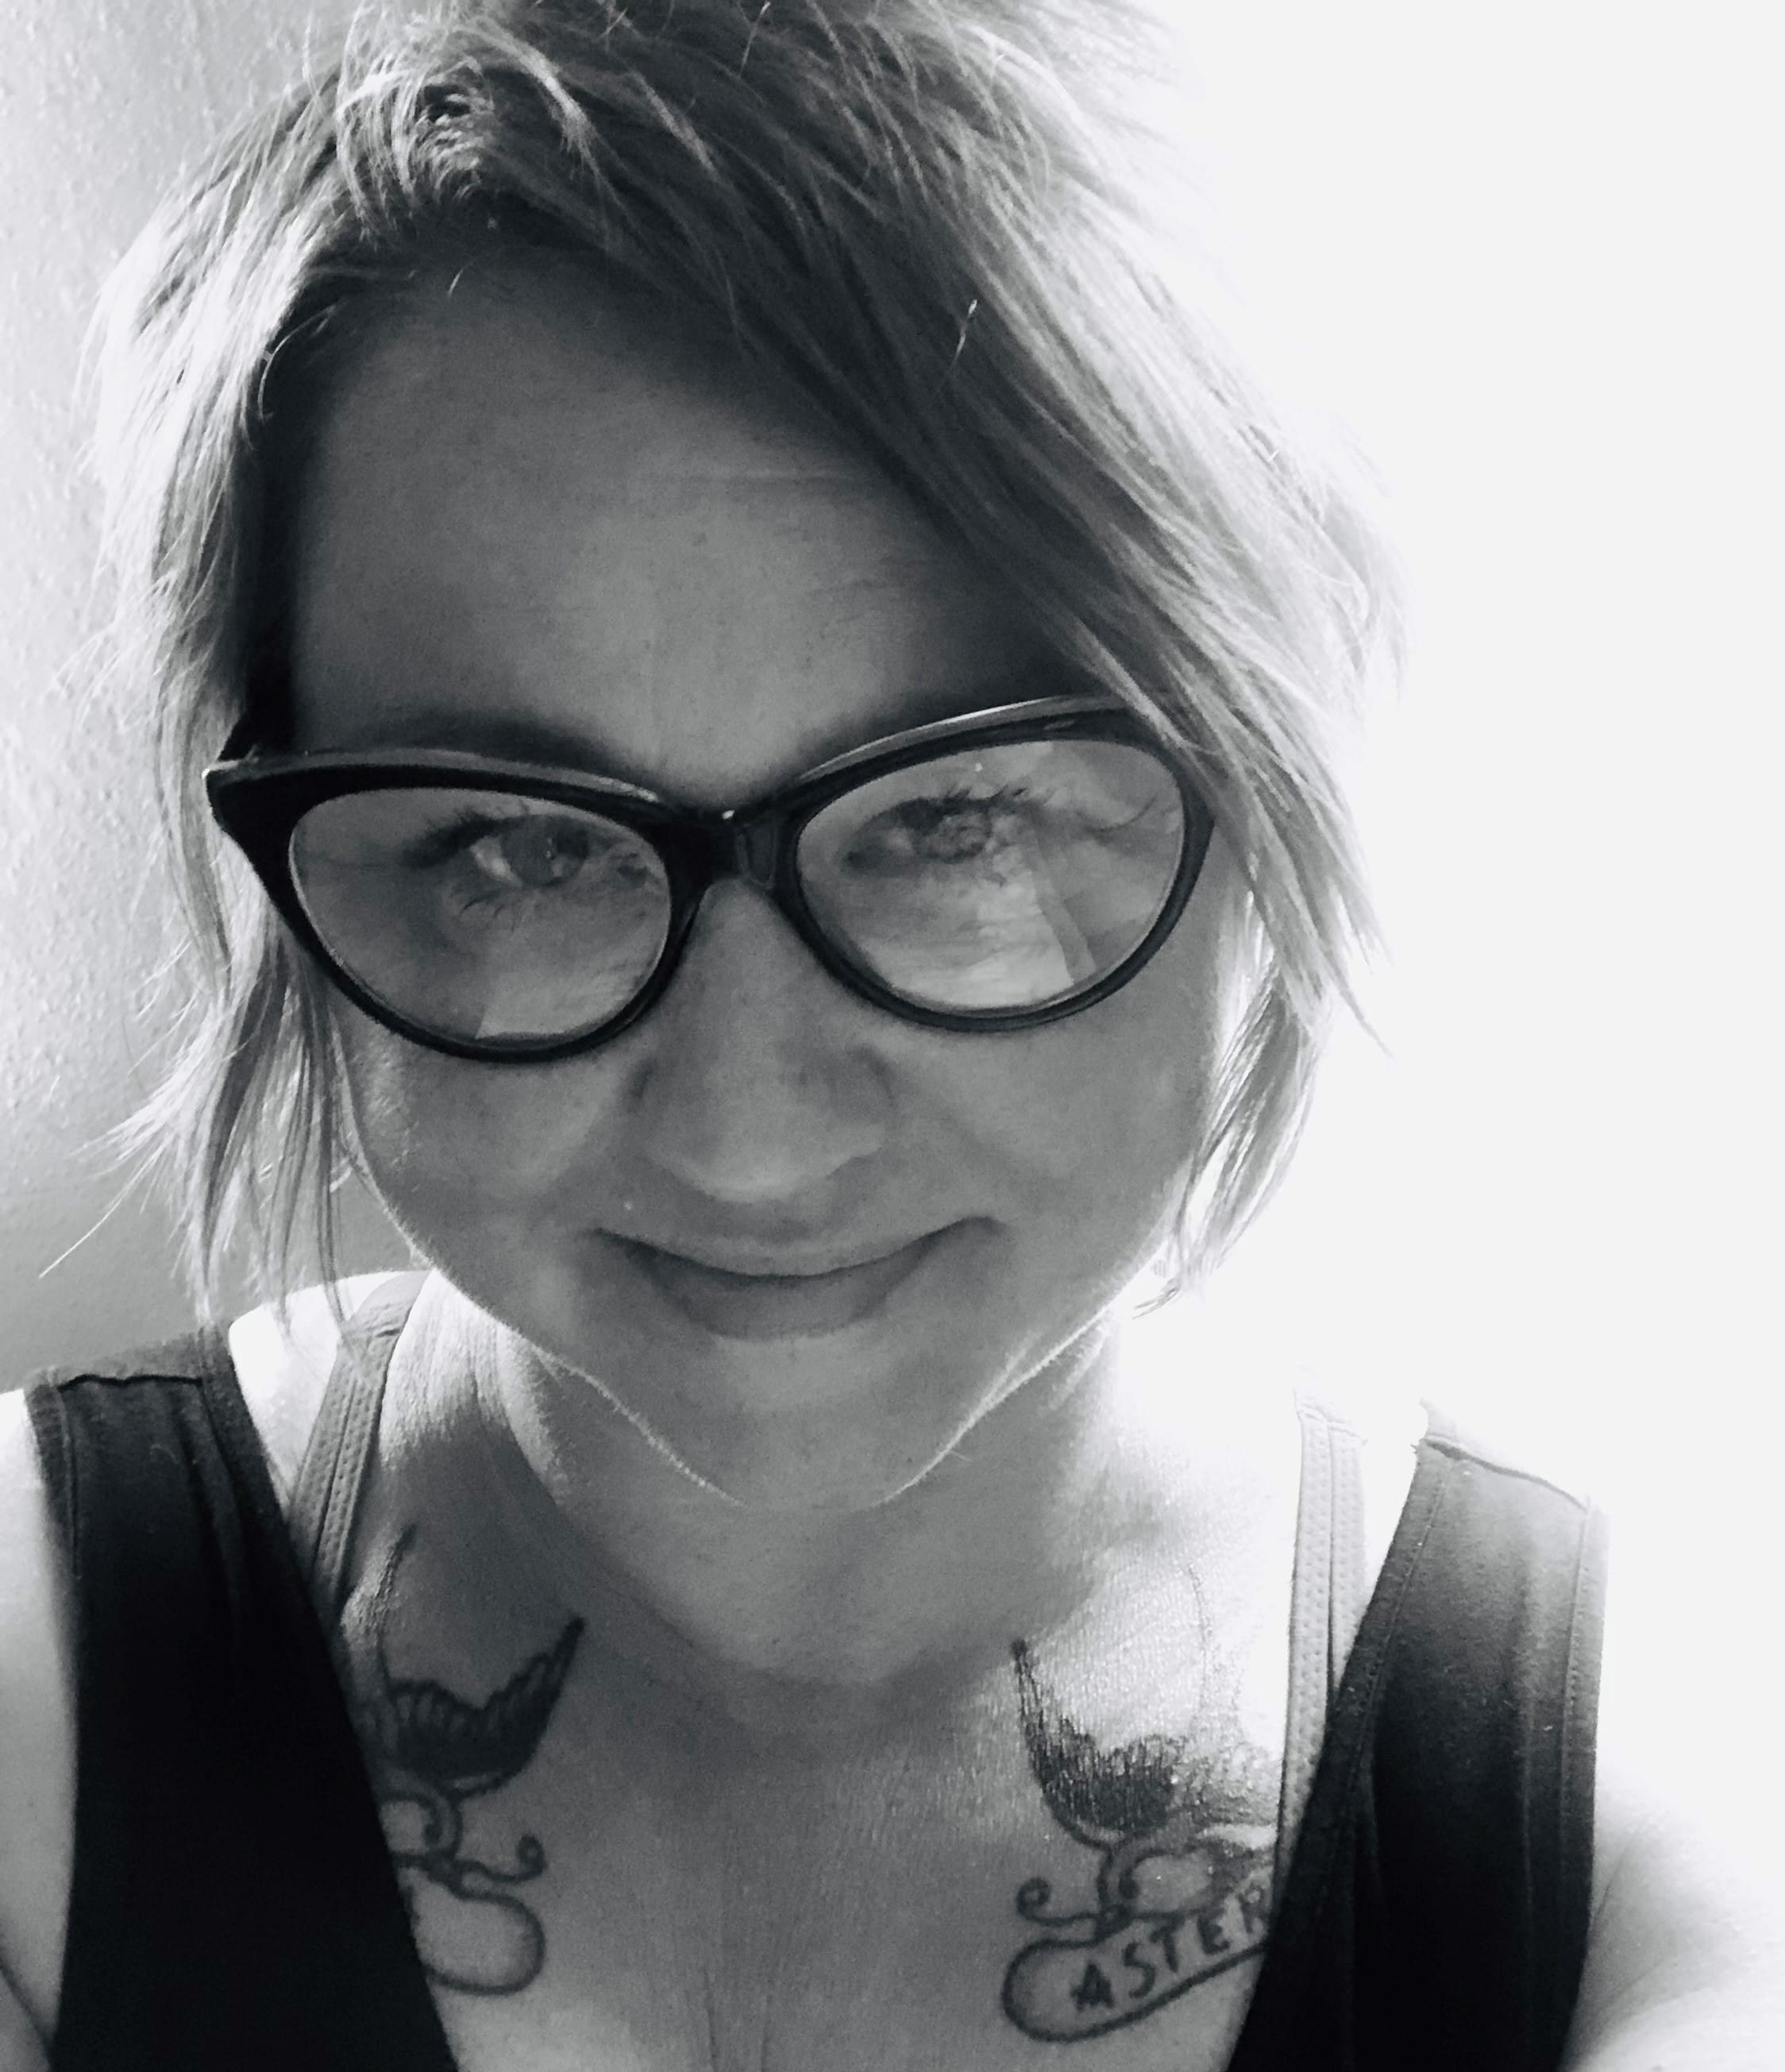 Black and white photo of a woman smiling, wearing glasses